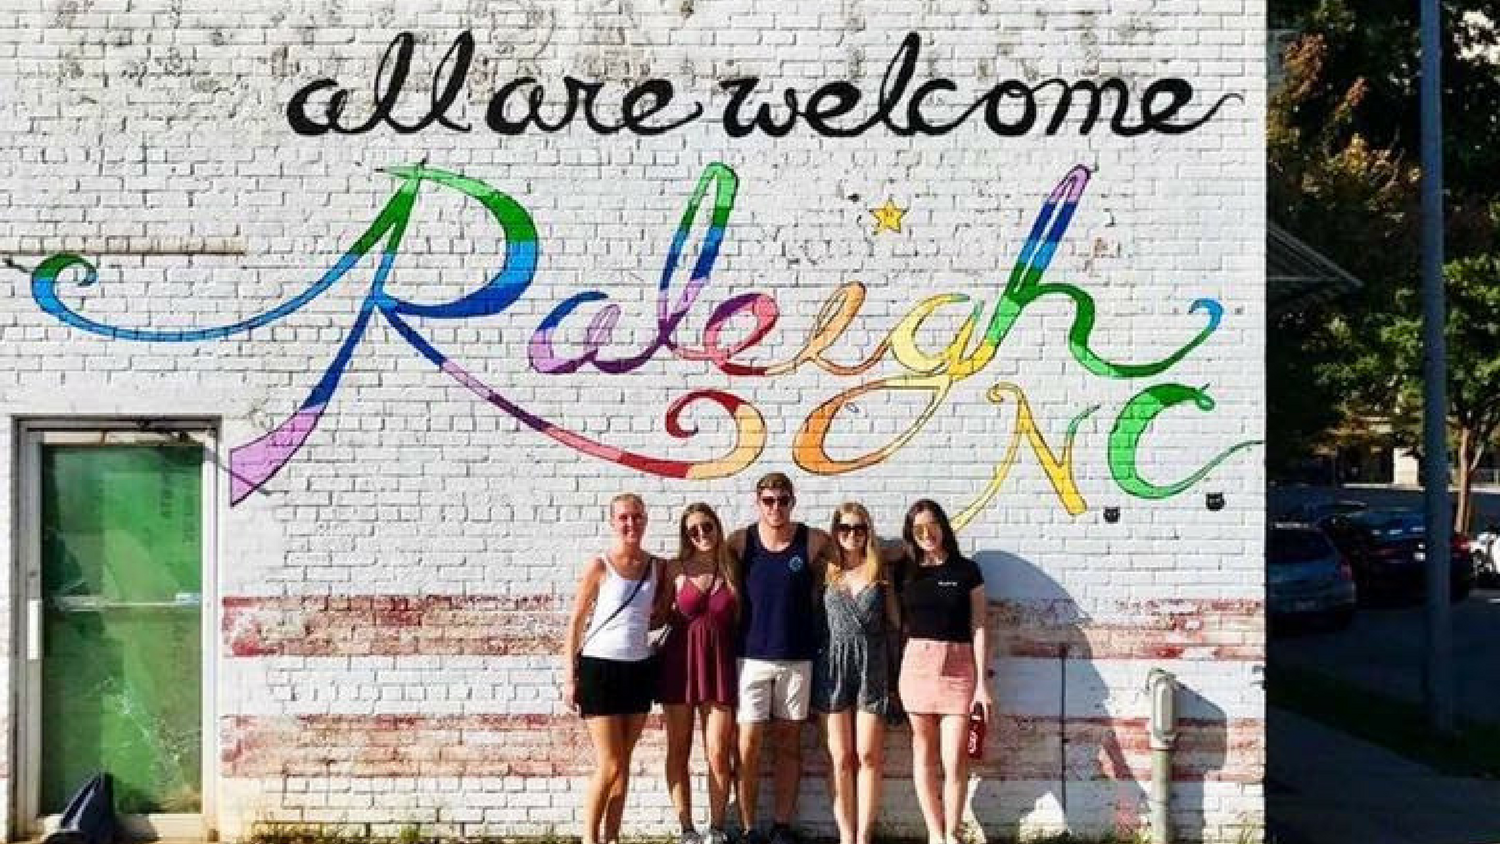 Five students in front of mural on wall painted "all are welcome Raleigh NC" in multicolor letters